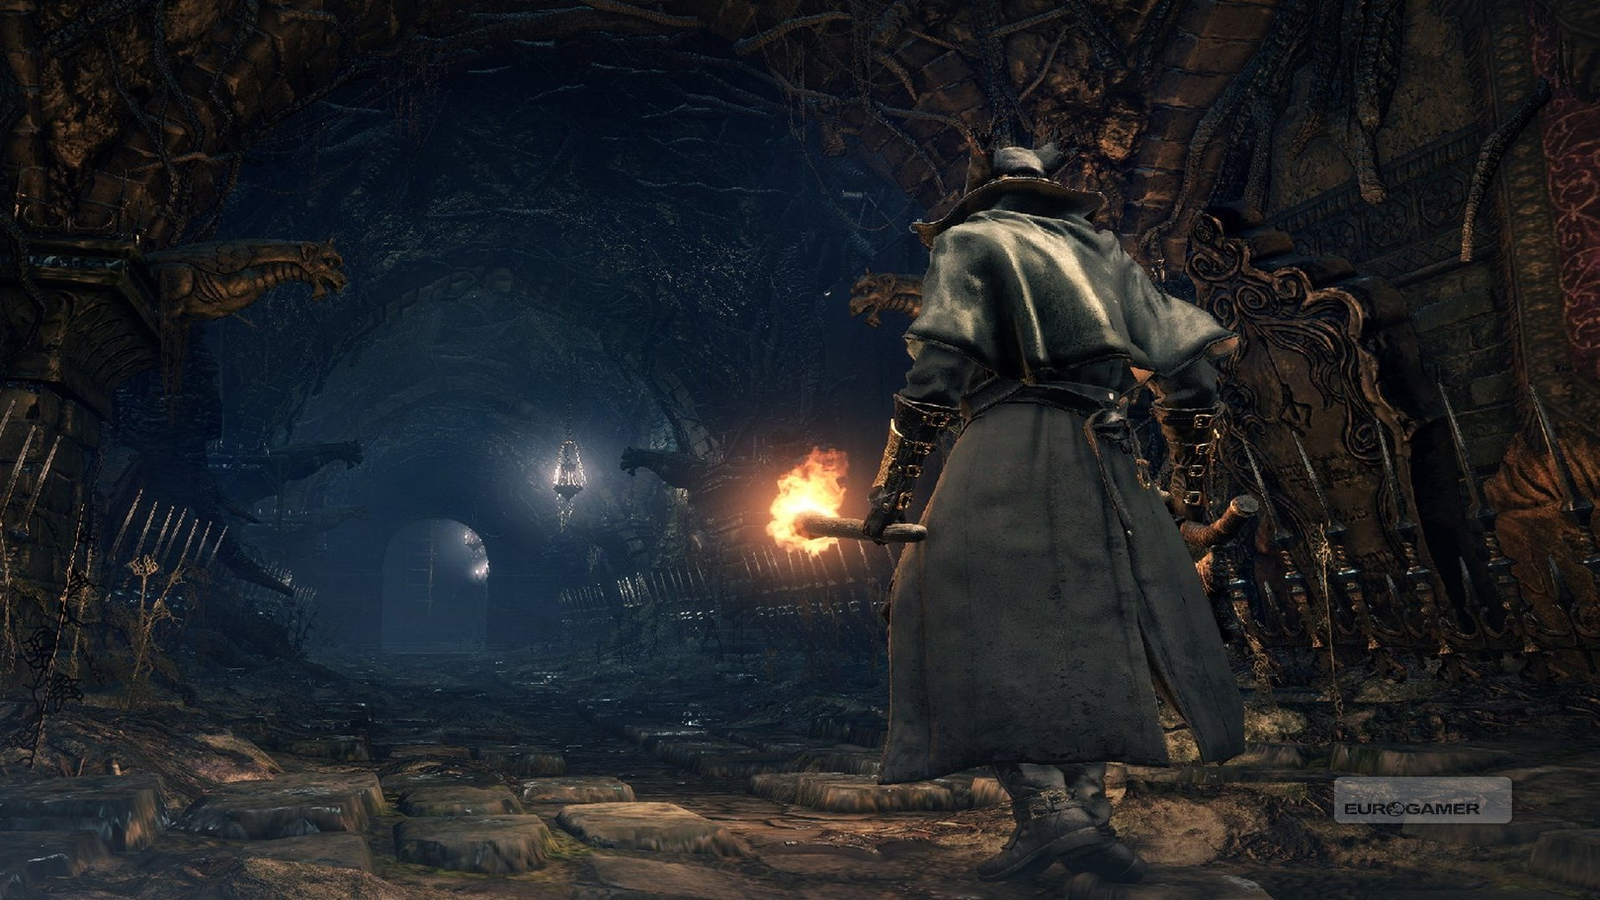 The game is almost ready: Sony Report Fuels Rumors of Bloodborne Remaster  Hitting PlayStation Store - Possible Release Date Revealed - FandomWire